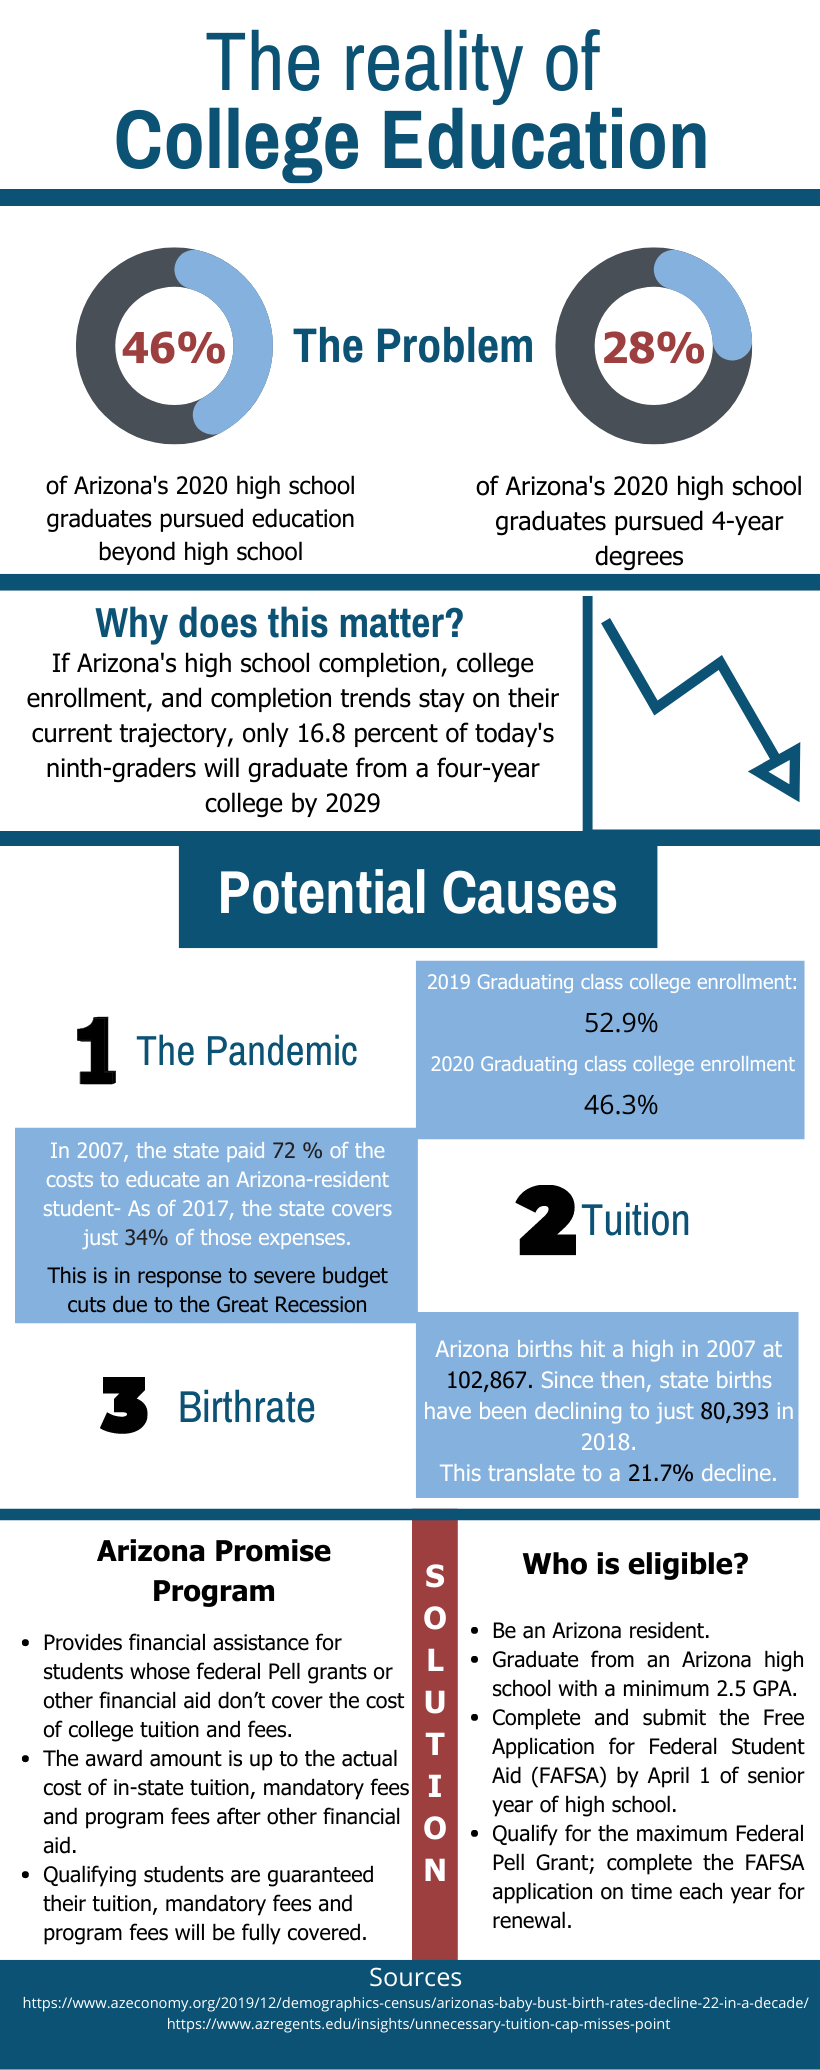 Reality of Higher Education in Arizona